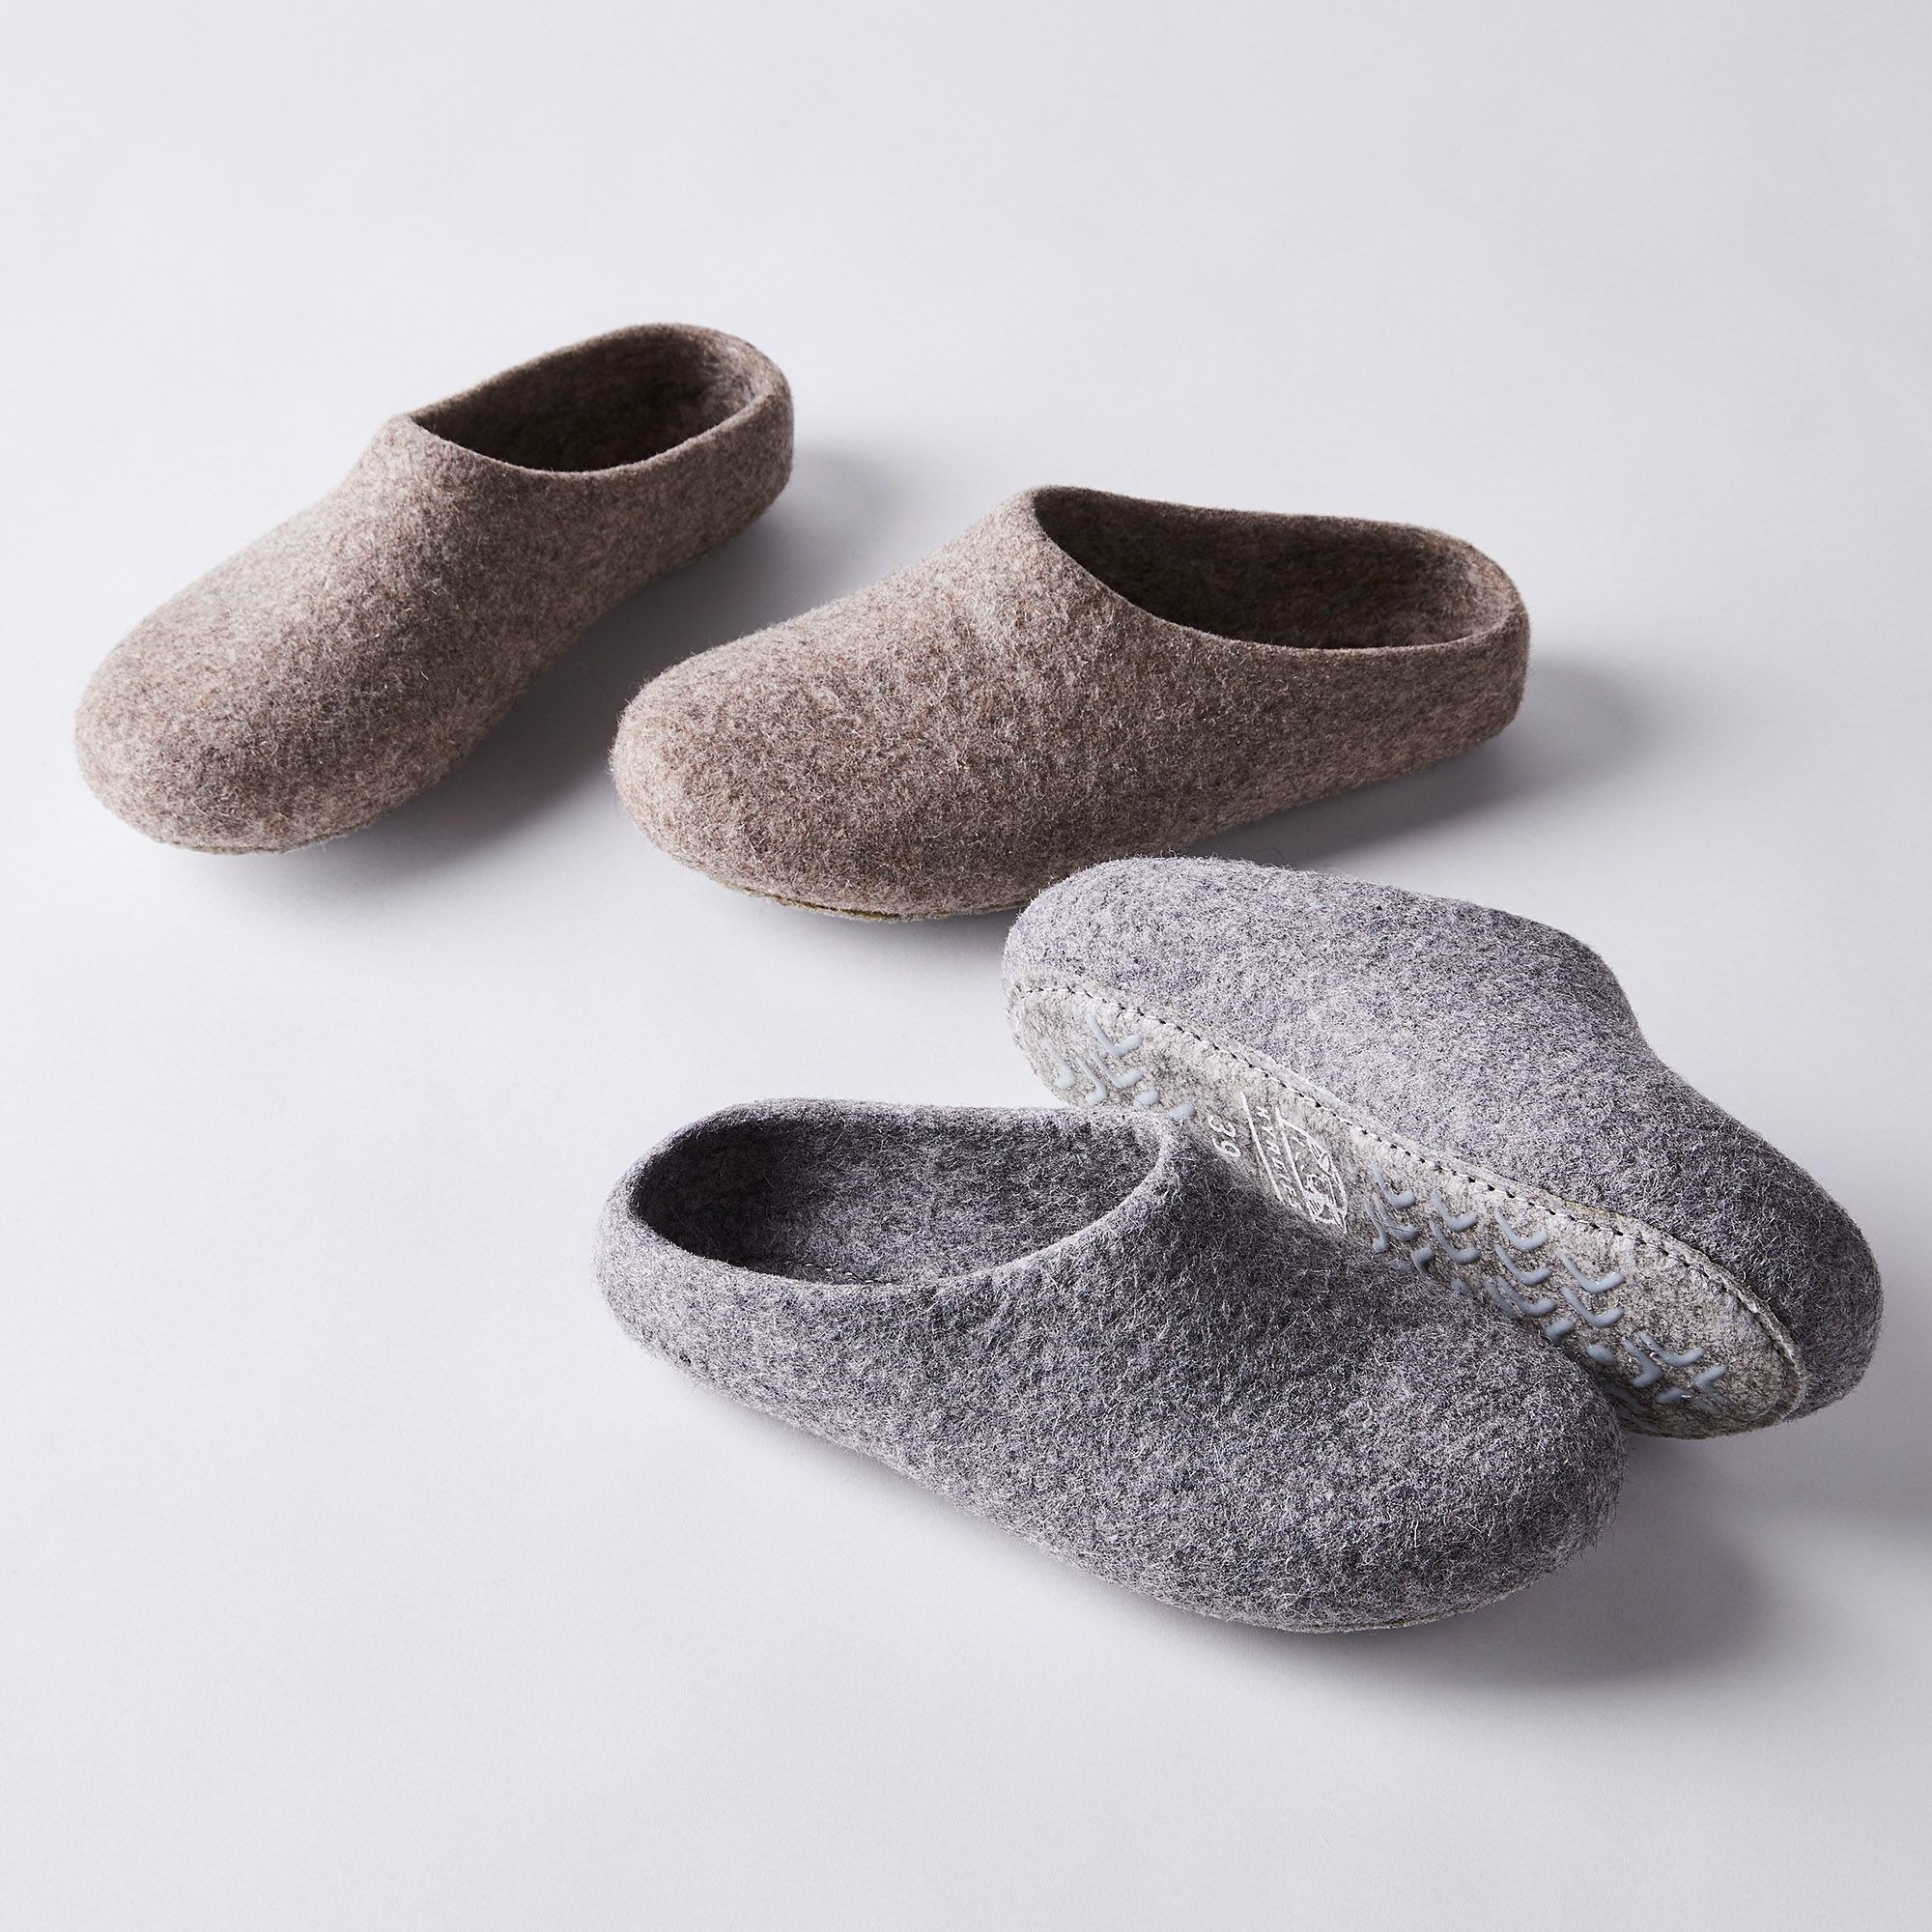 Photo of the slippers in both colors